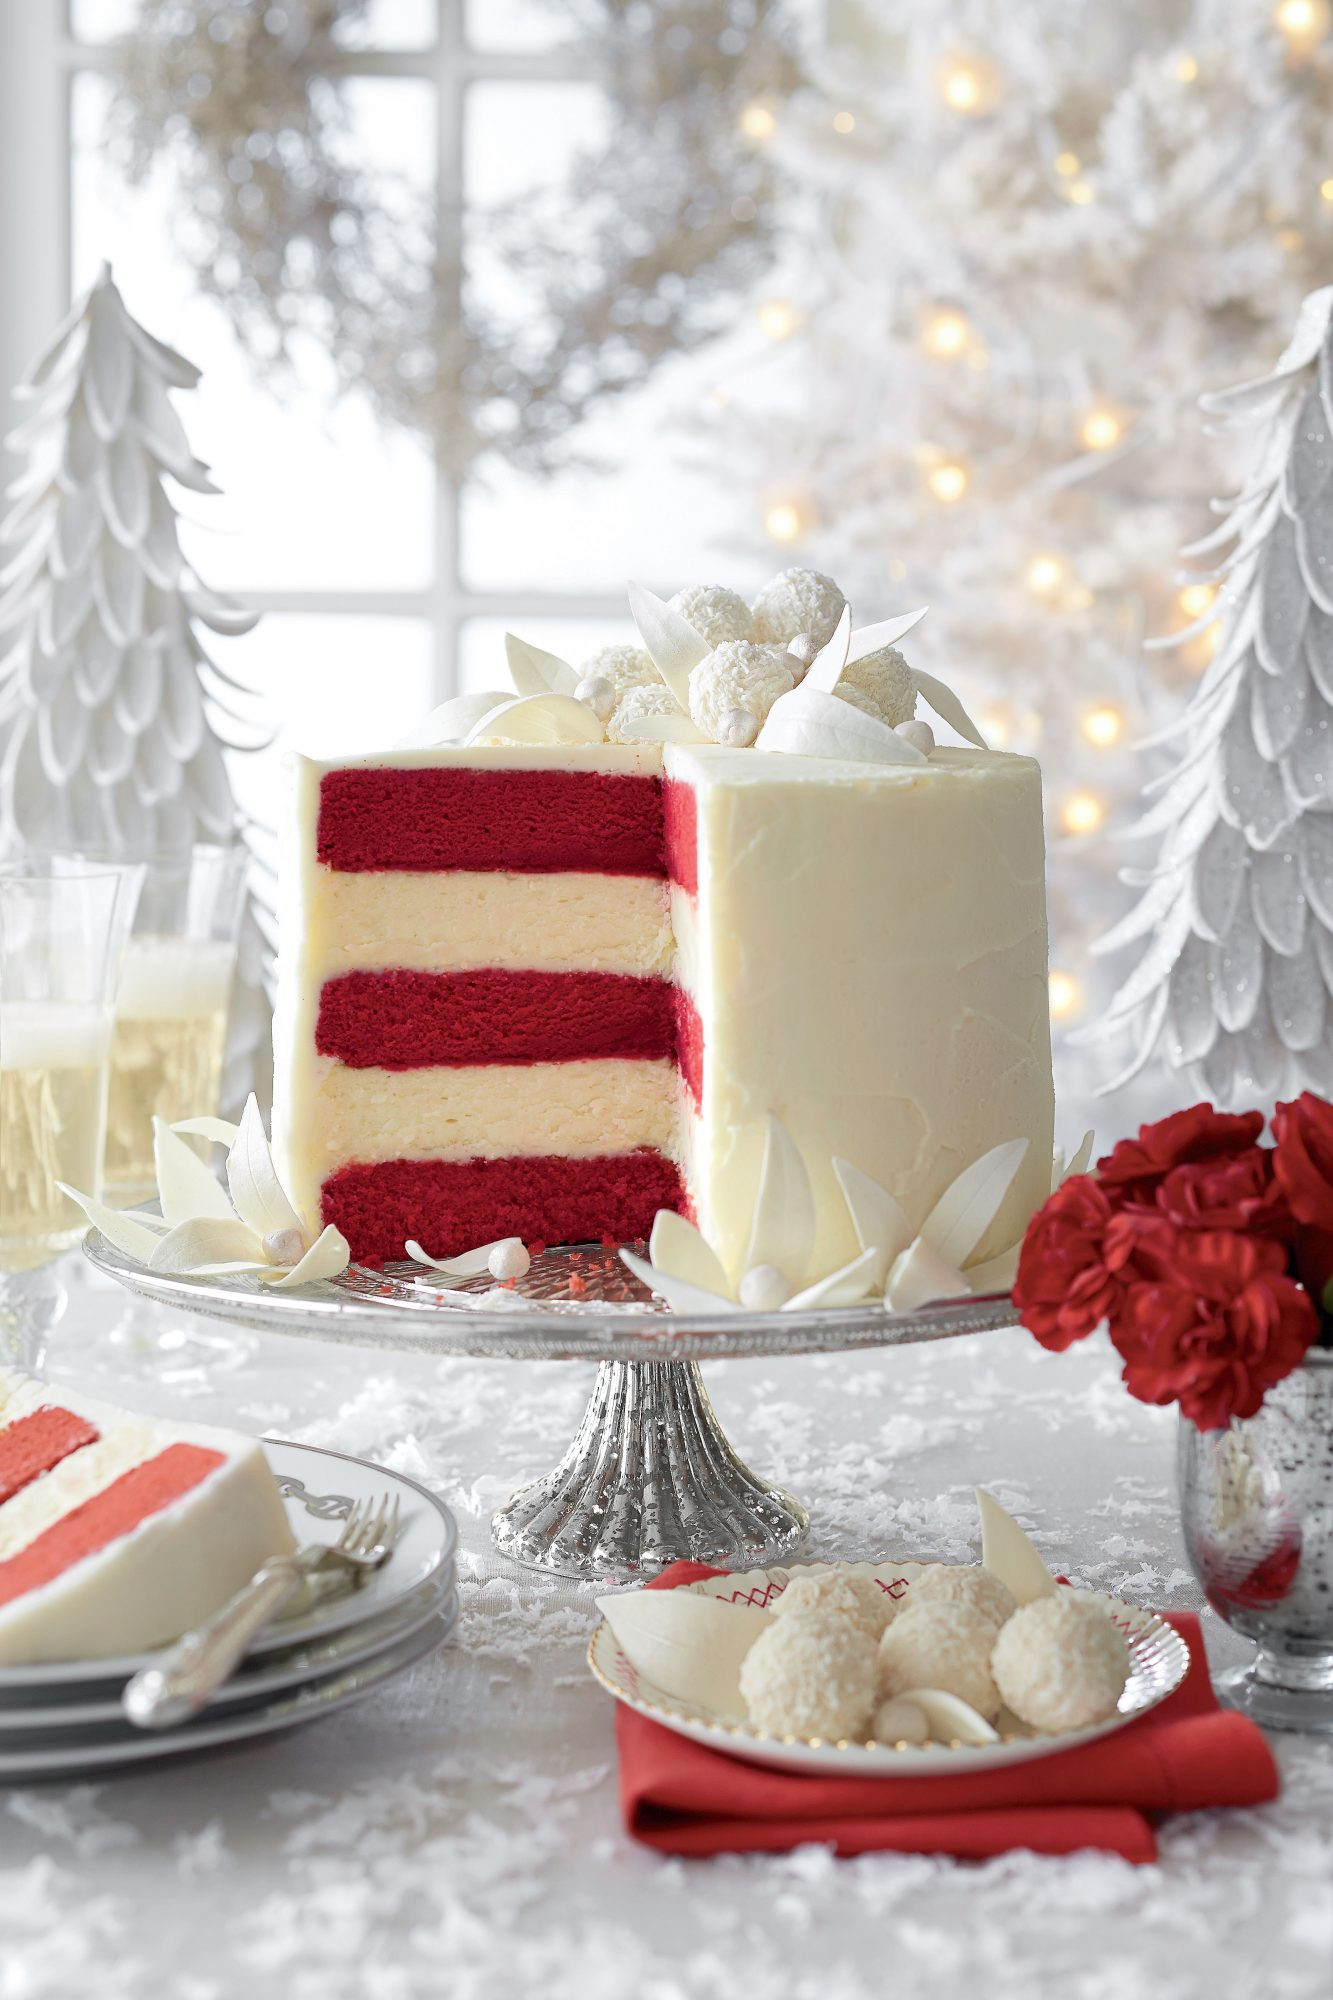 White Fruit Cake Recipe Southern Living
 This Is Our Most Popular Christmas Cake Ever Southern Living